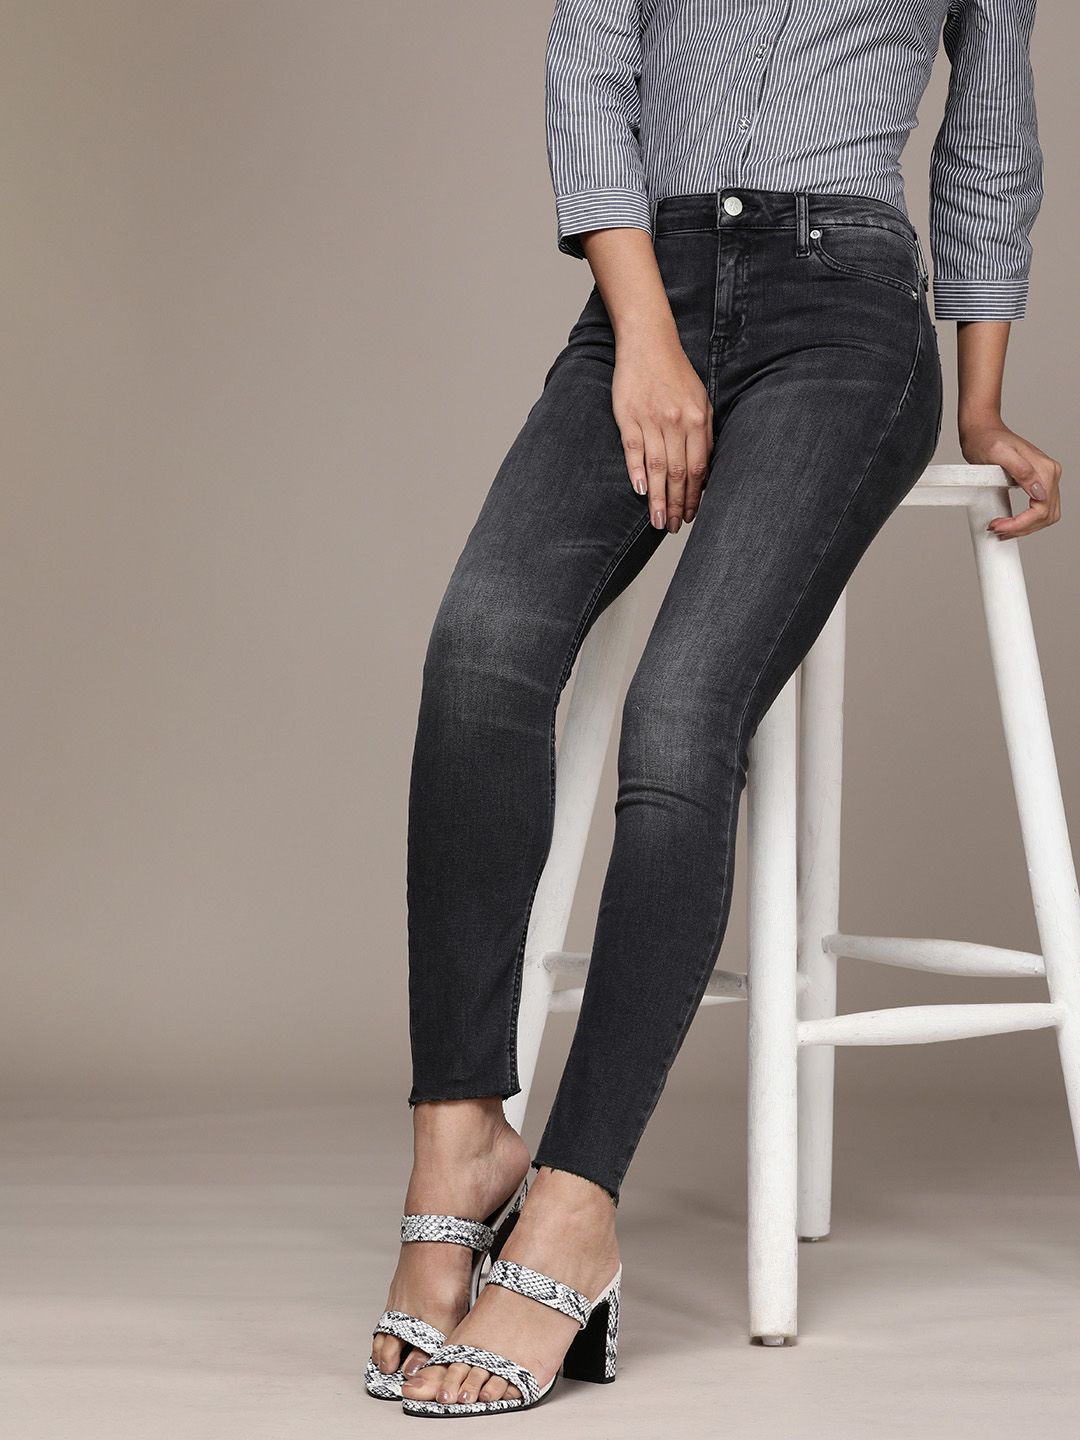 Calvin Klein Jeans Women Black Super Skinny Fit Light Fade Stretchable Casual Jeans Price in India